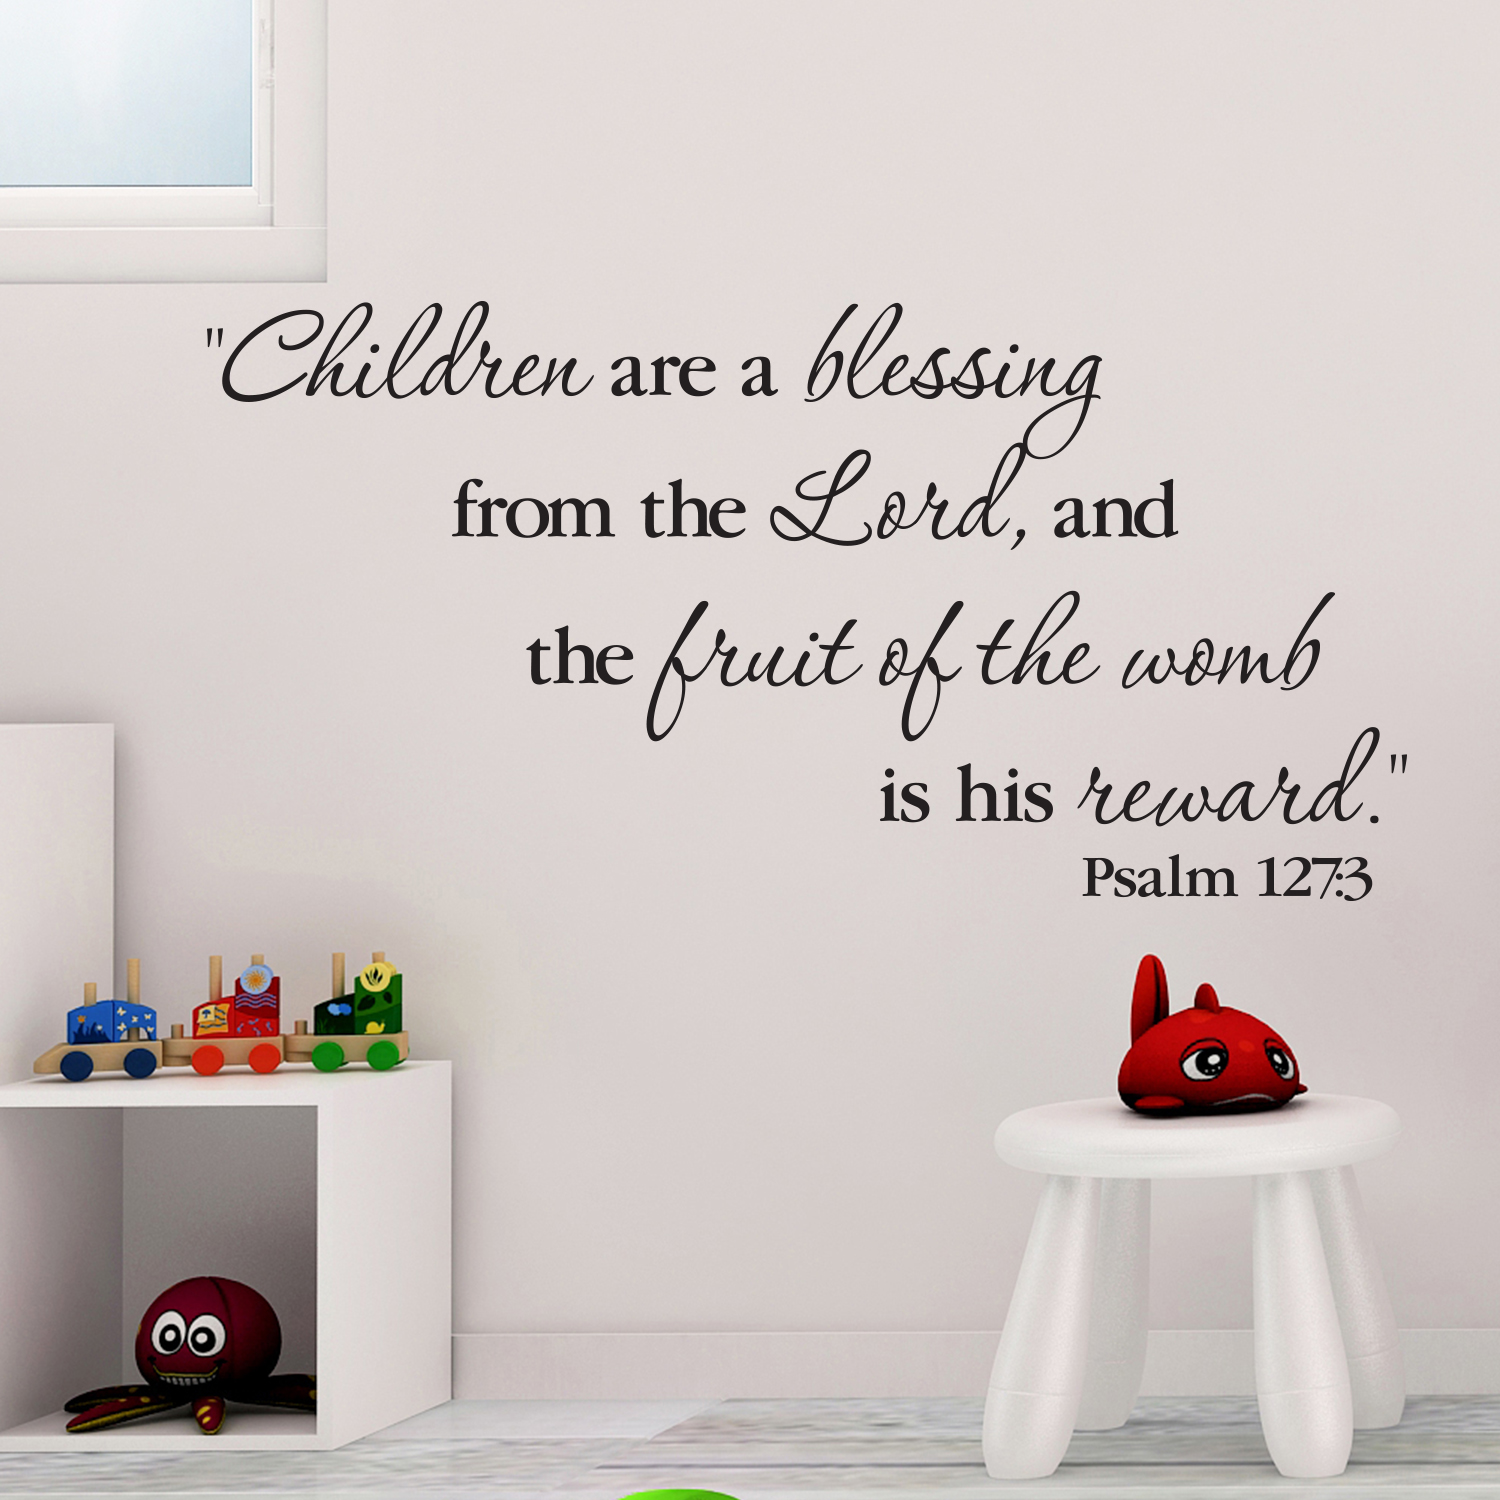 Psalm 127v3 Vinyl Wall Decal 1 Children are a Blessing from the Lord